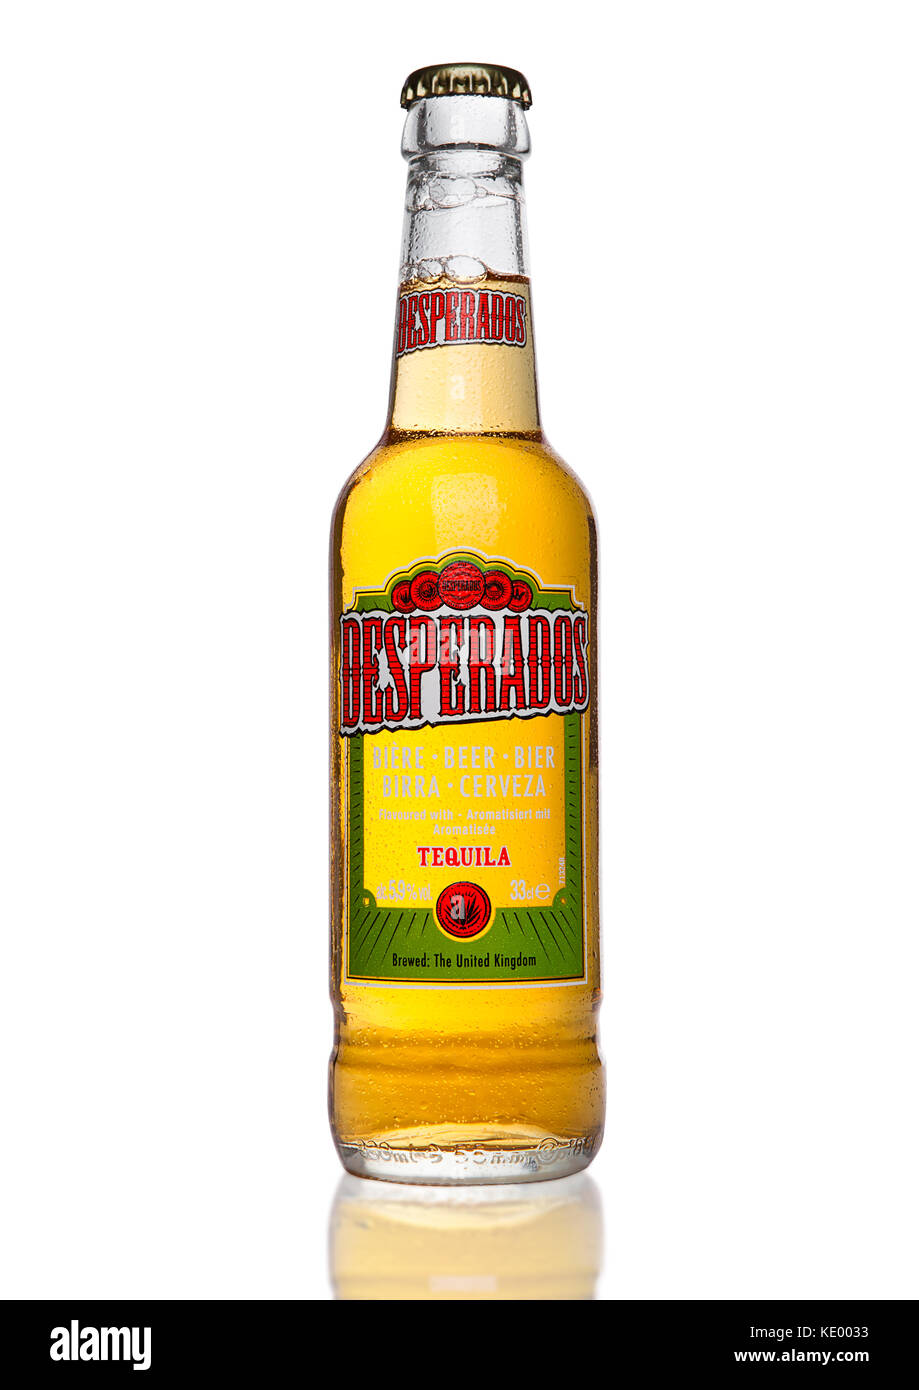 LONDON, UK - JANUARY 02, 2017: Bottle of Desperados beer on black background, lager flavored with tequila is a popular beer produced by Heineken and s Stock Photo